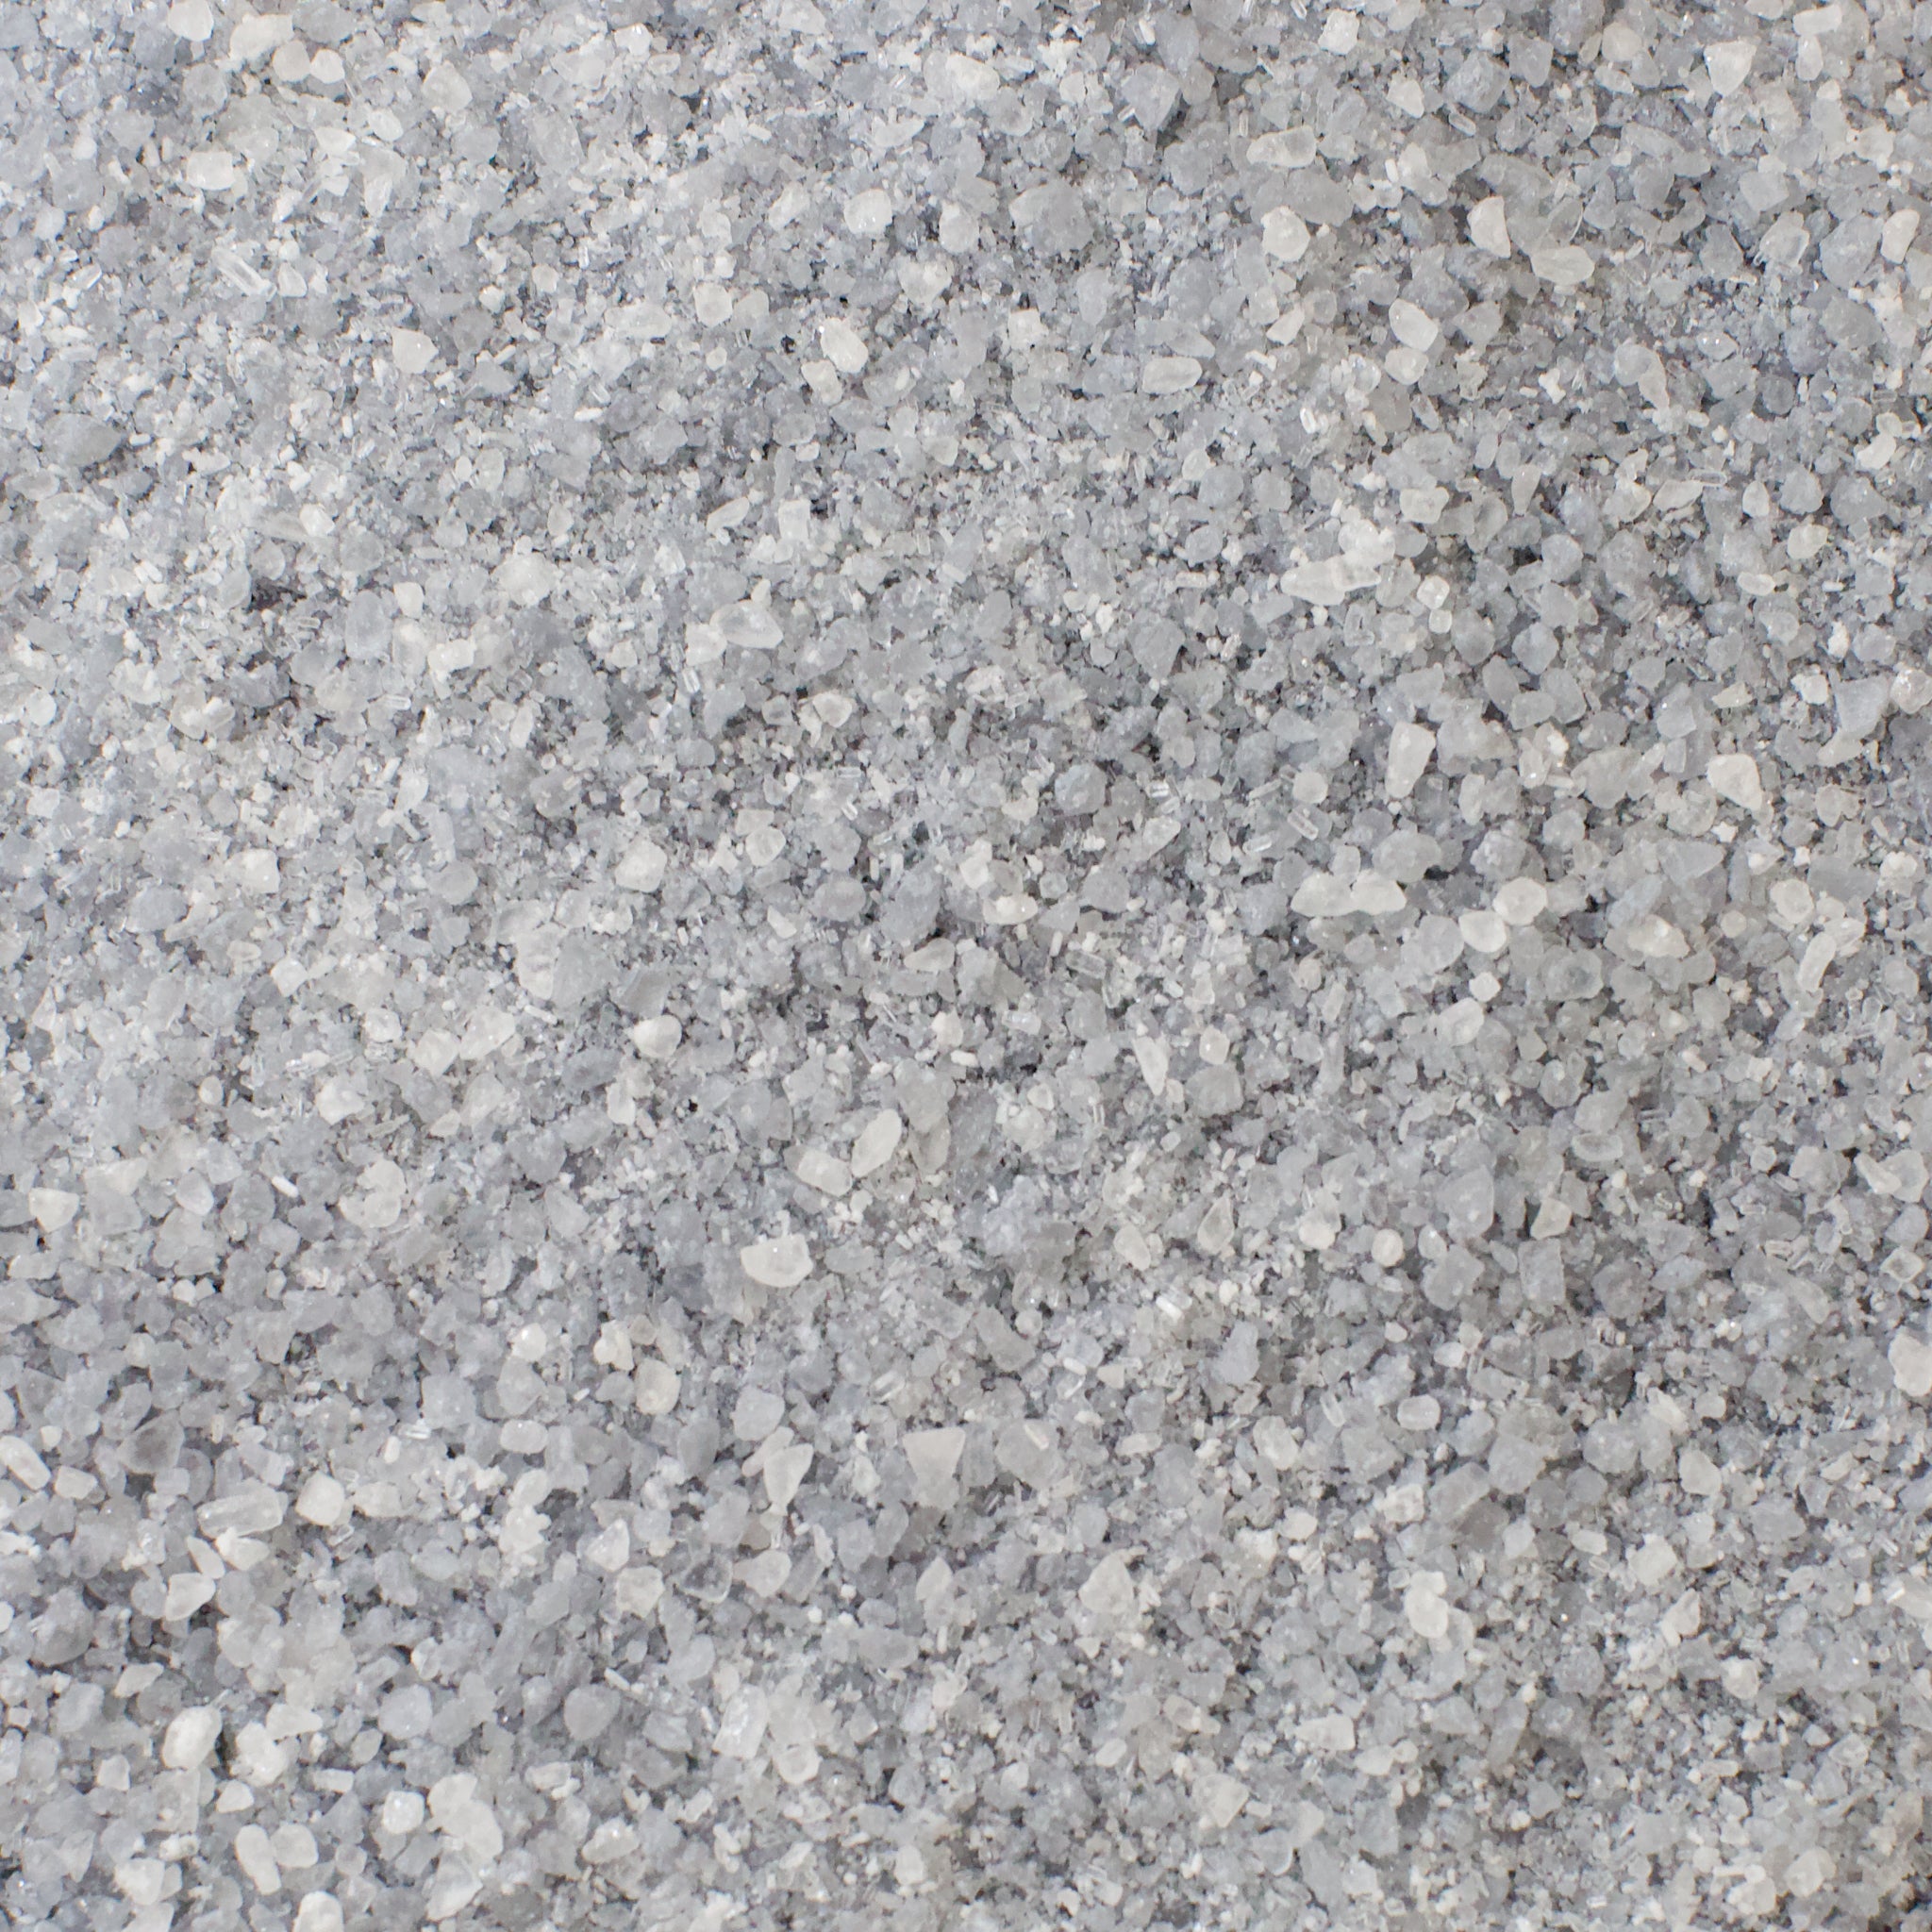 Close up of grey and white salts.